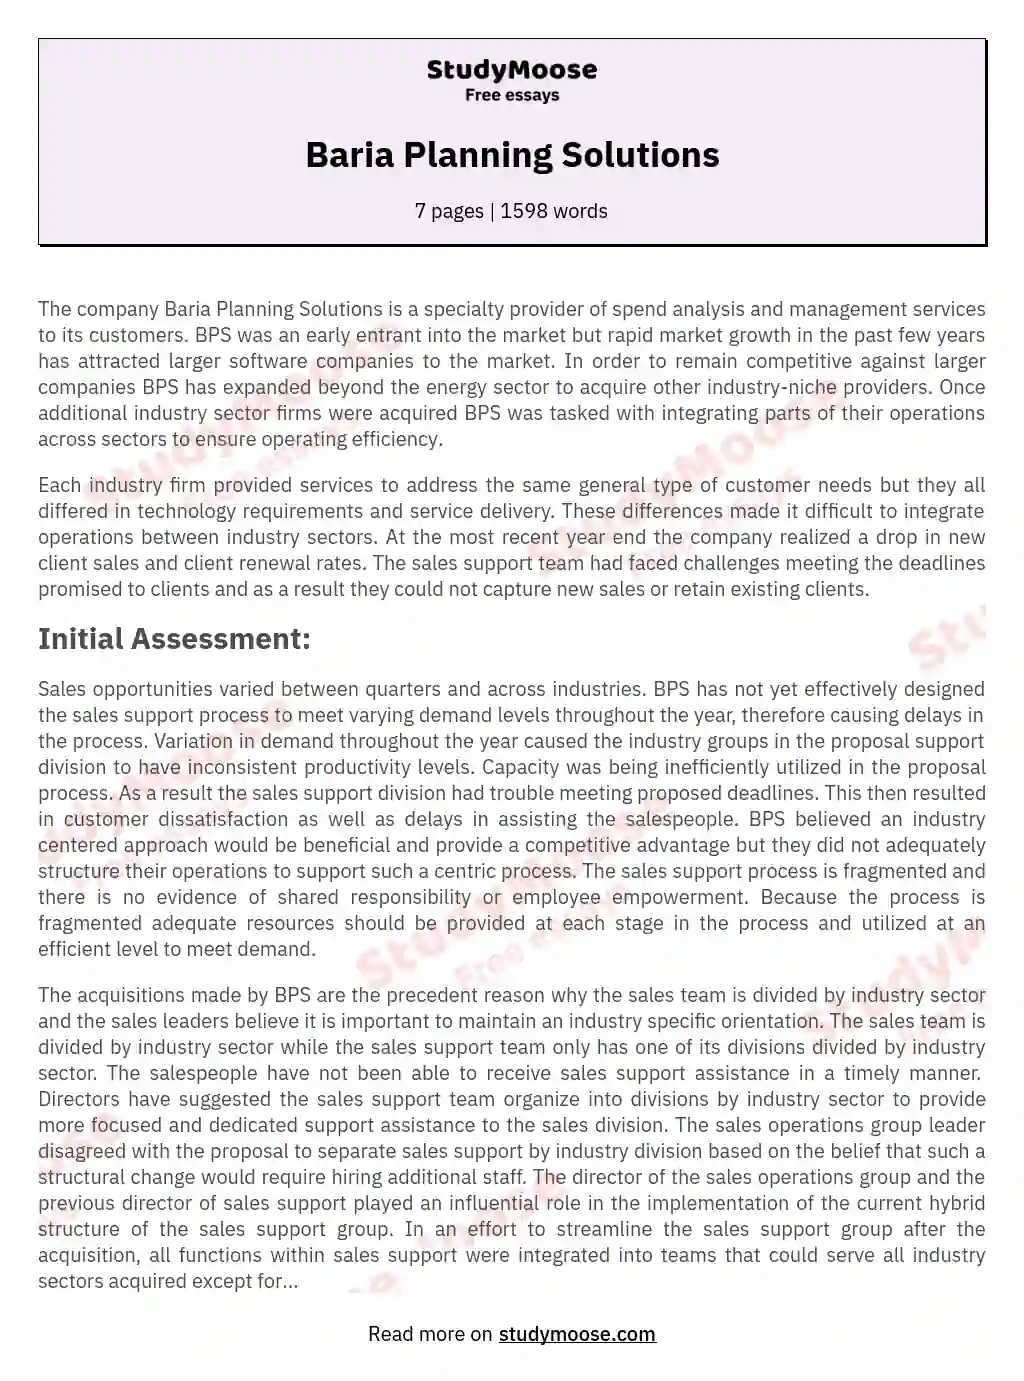 Baria Planning Solutions essay